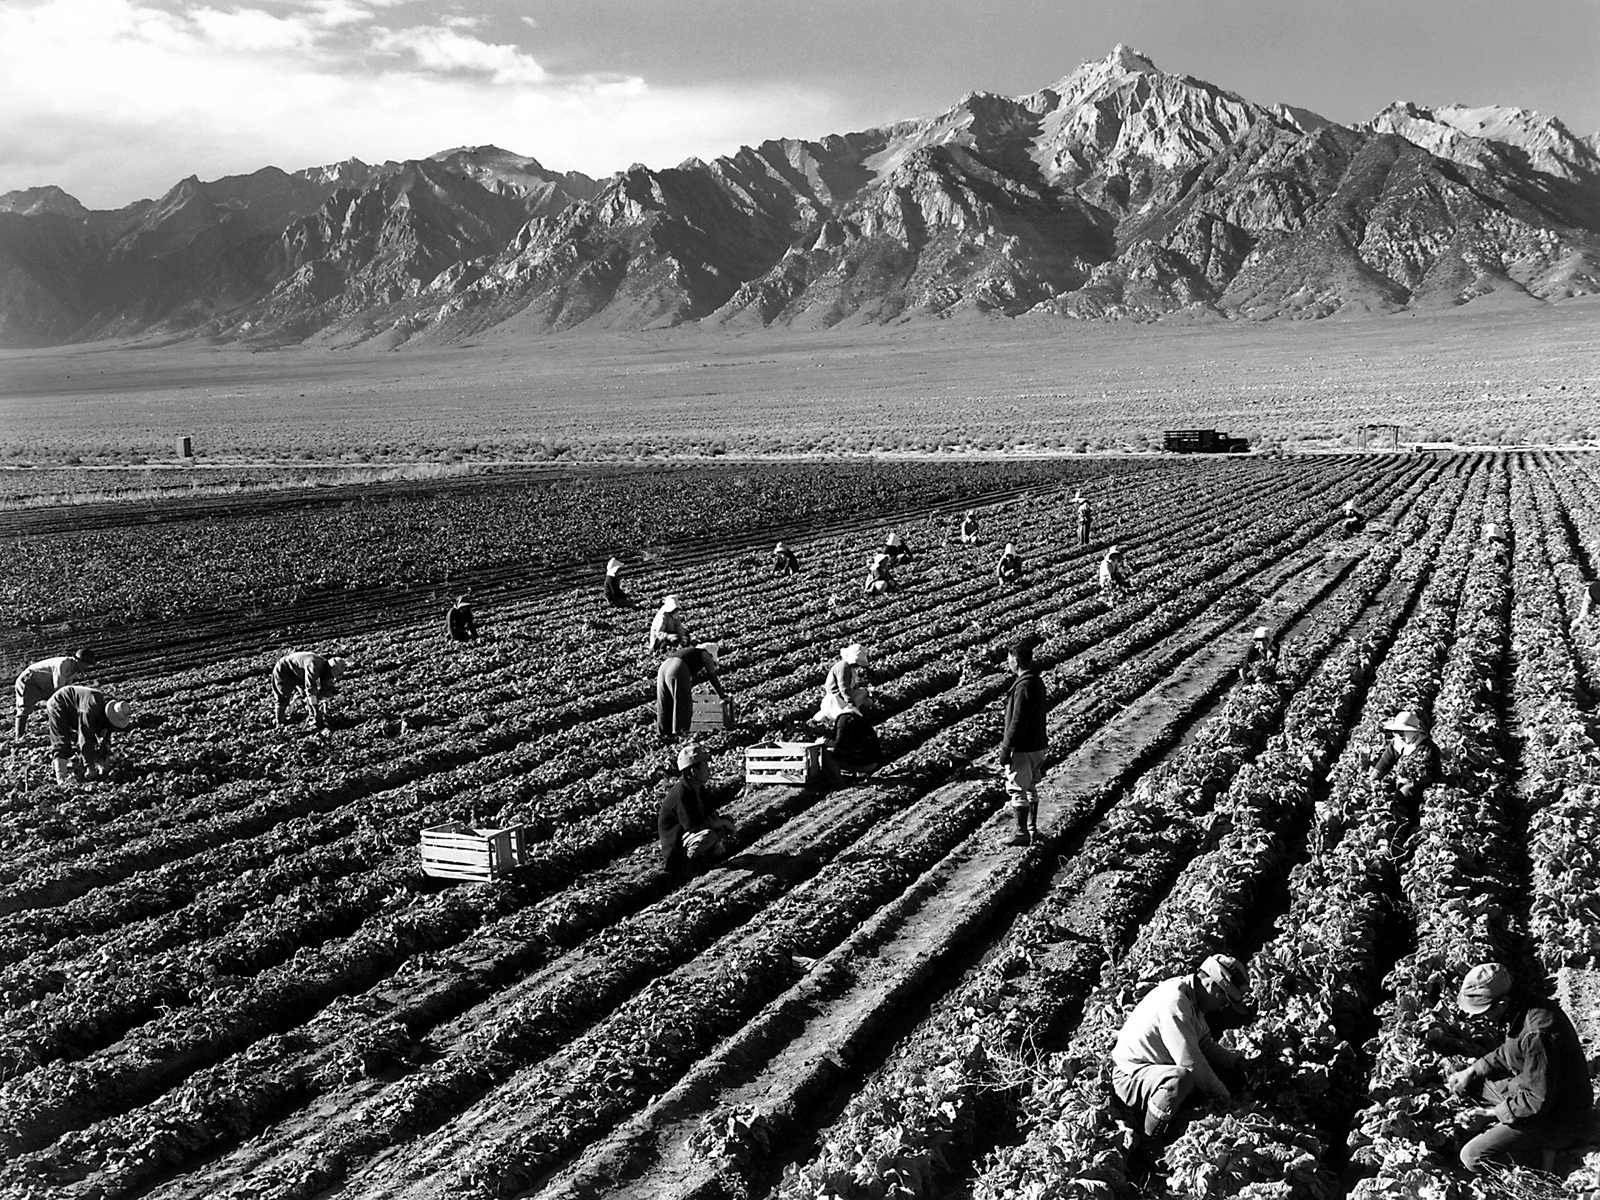 Mt. Williamson looms in background as workers from the Manzanar War Relocation Center tend a farm in Manzanar, California, in 1943. Photo by Ansel Adams/LOC/Creative Commons